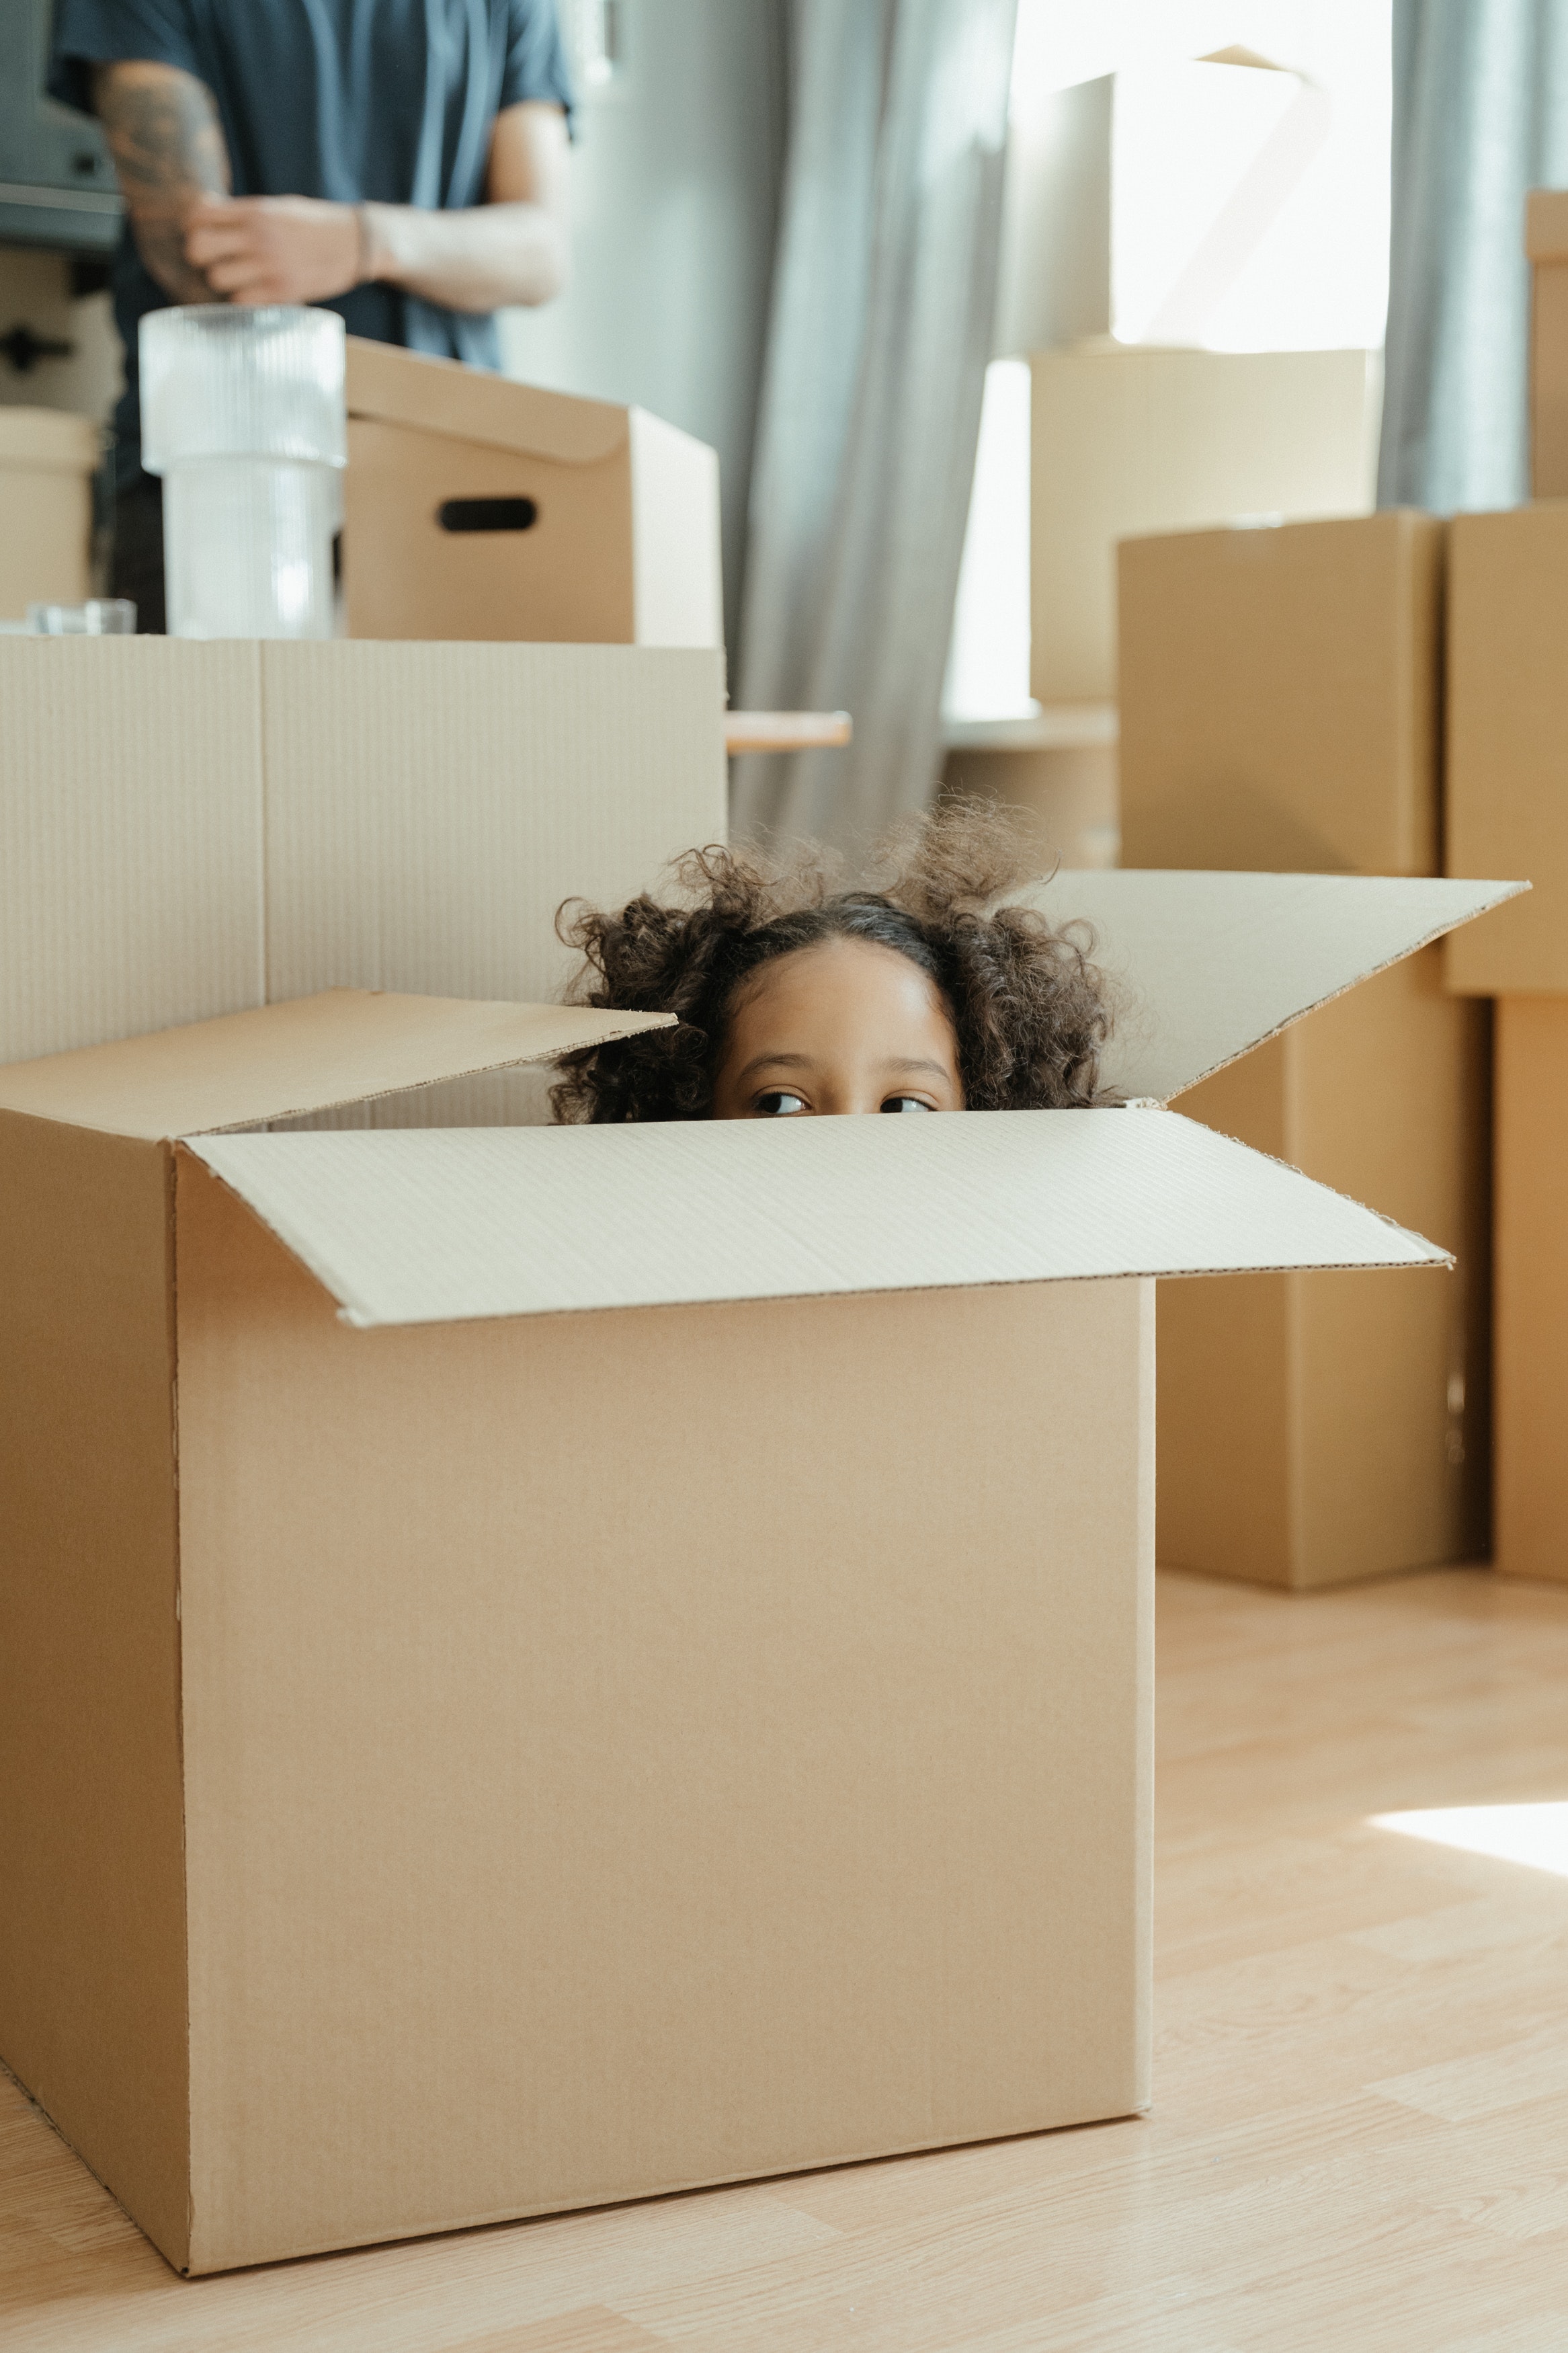 Tips To Help Your Kids Make the Move to a New House